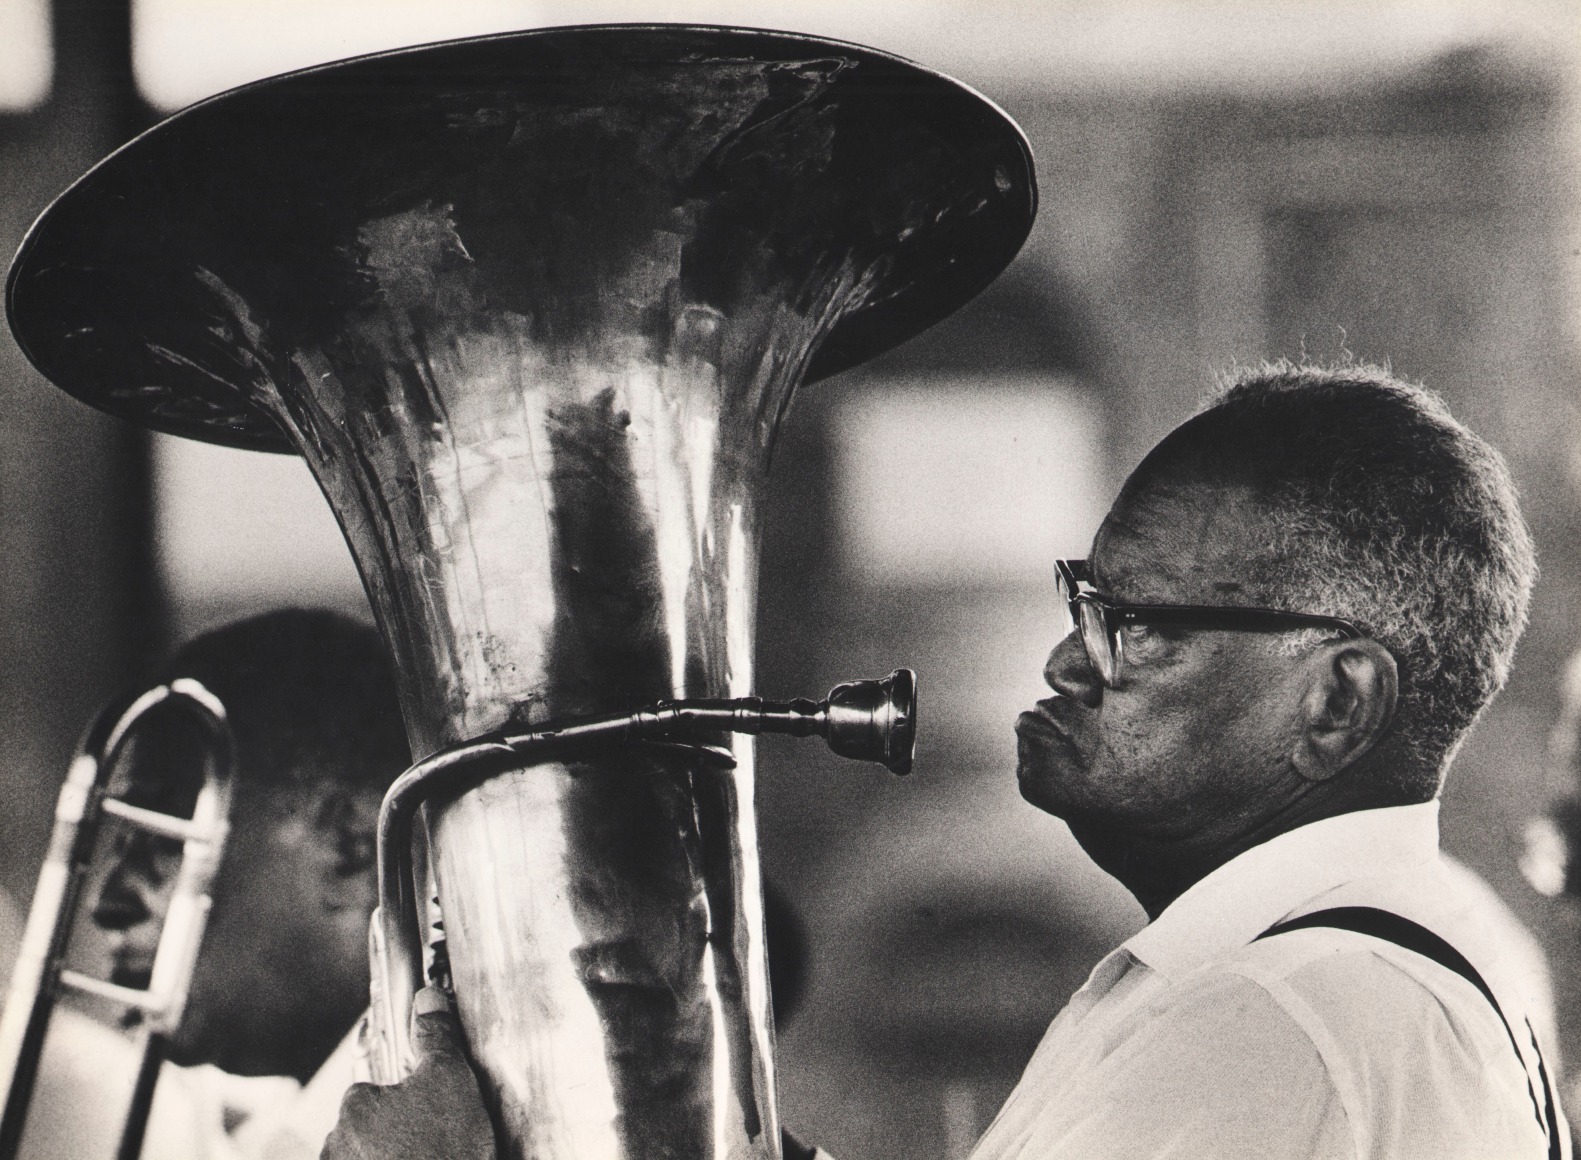 Ozier Muhammad, Tuskegee Institutional Jazz Orchestra, NYC, c. 1983